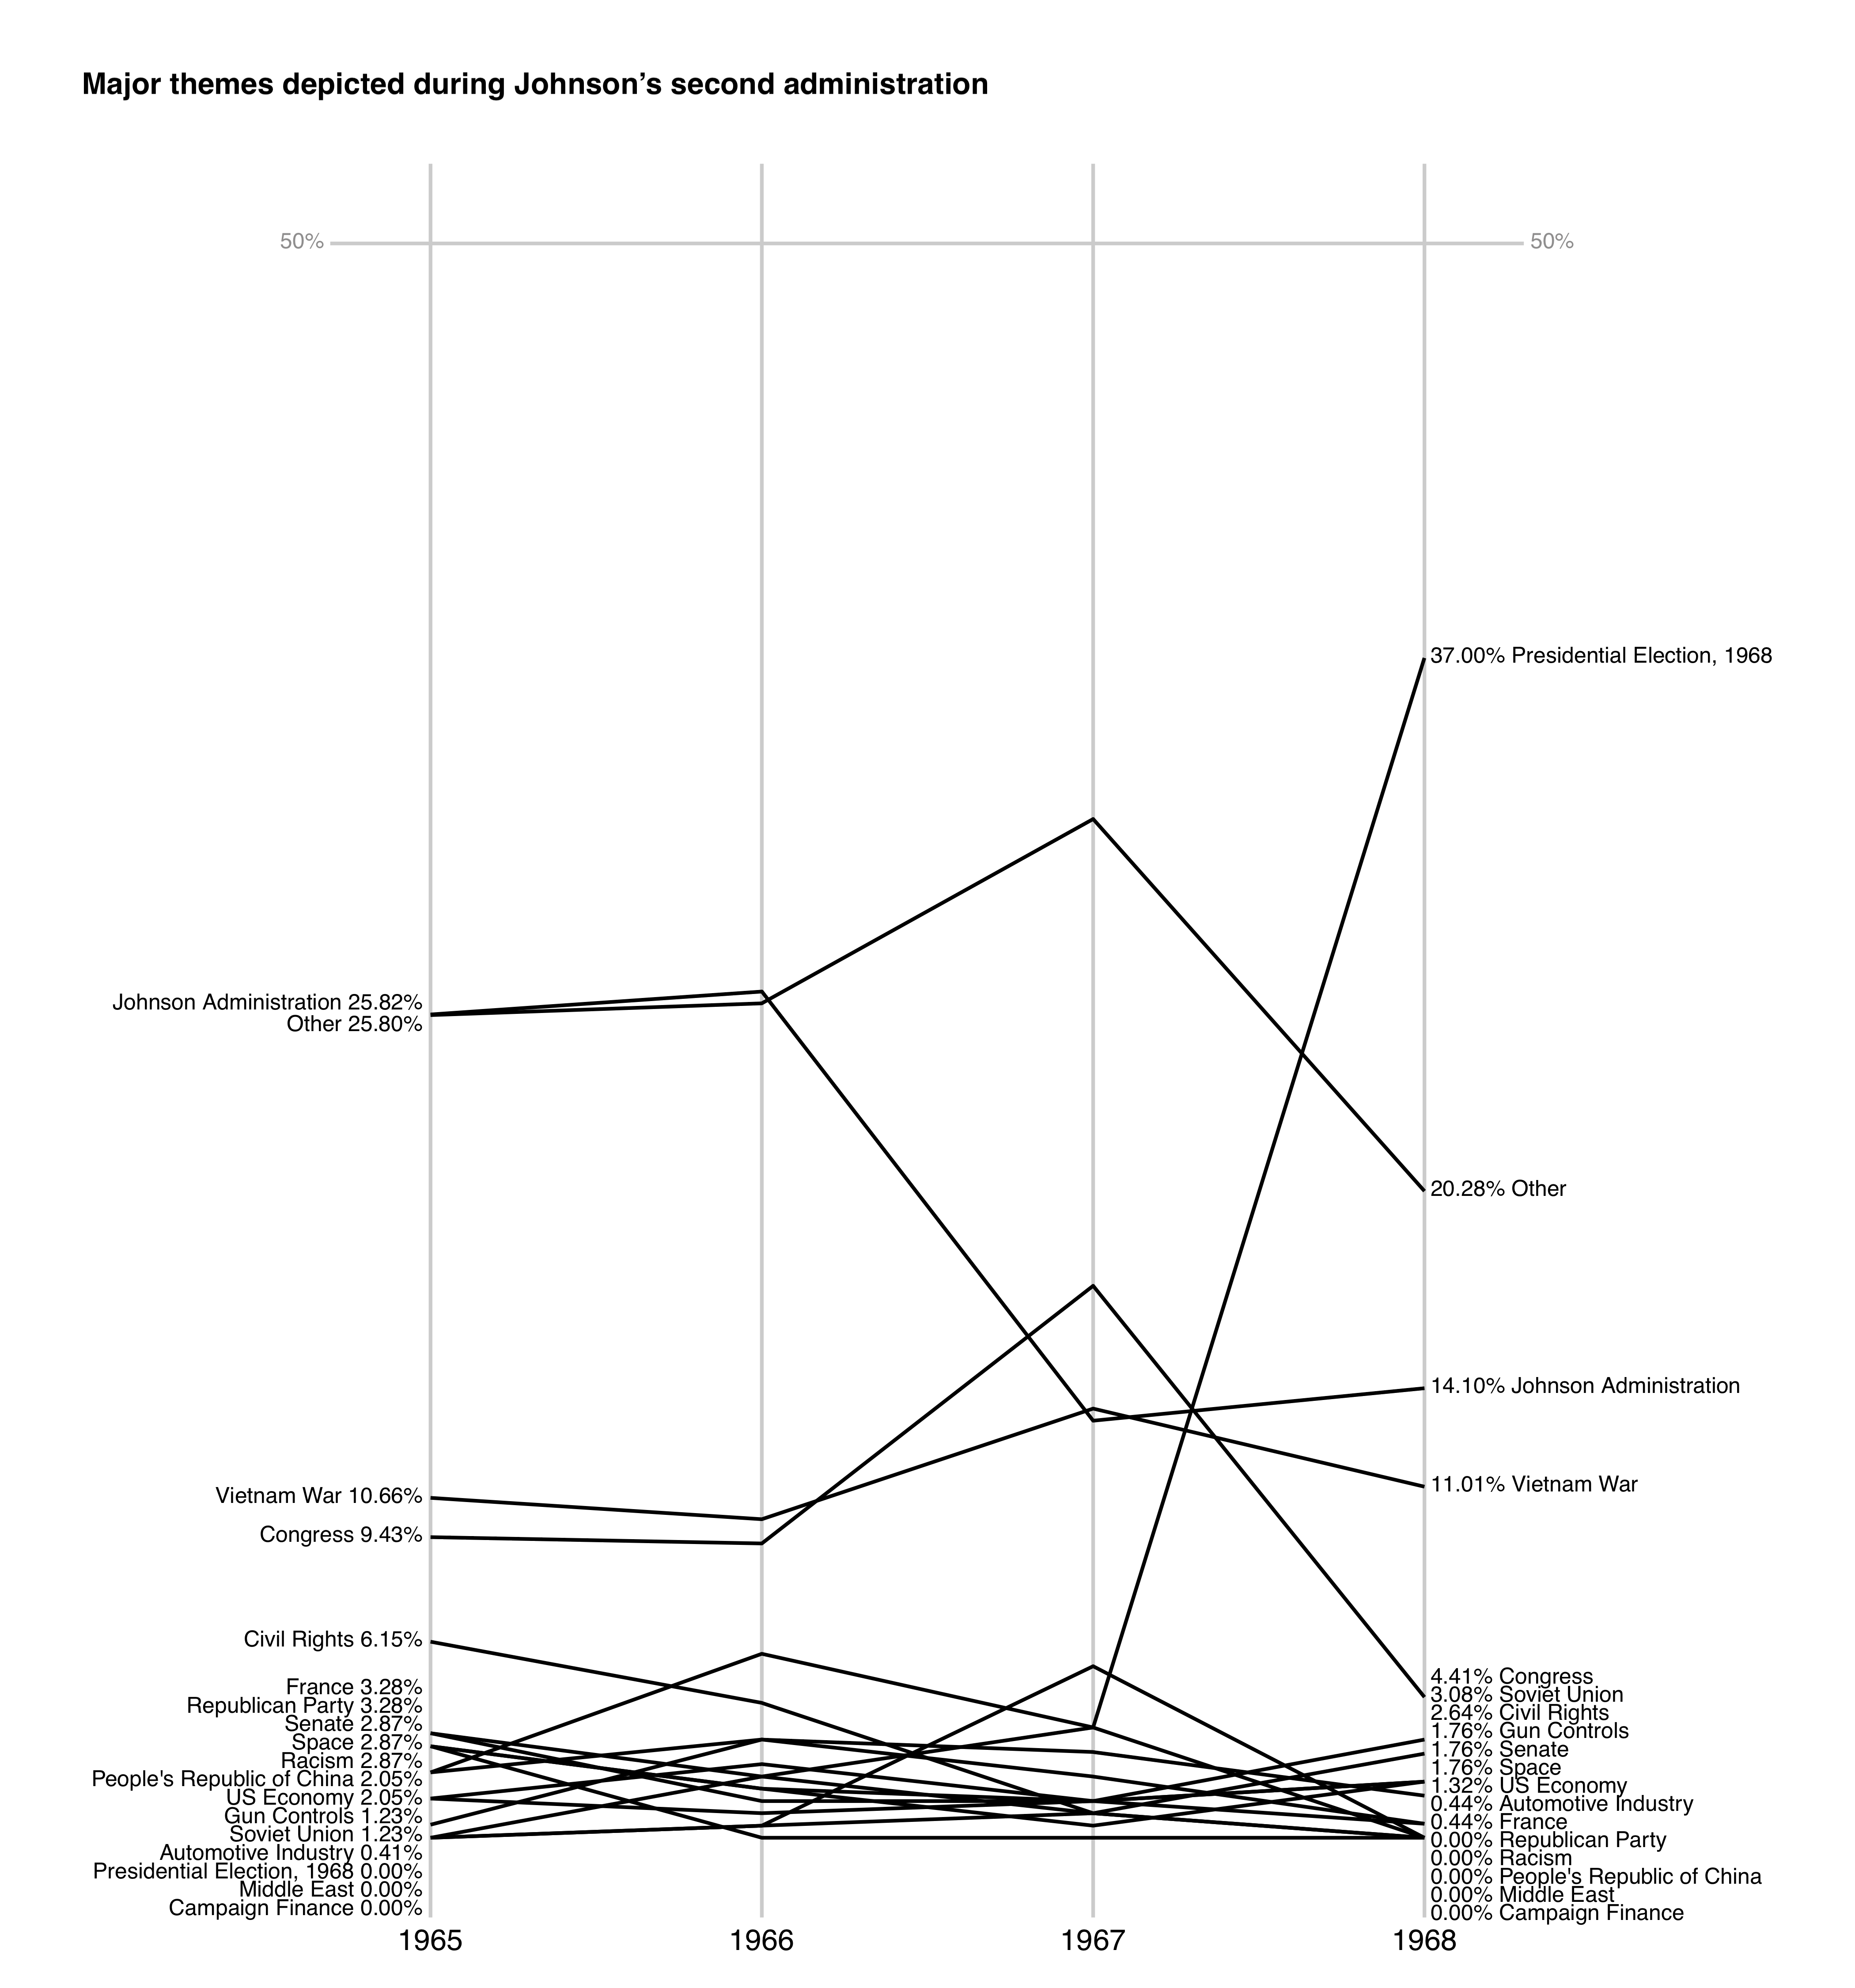 Slopegraph showing how the major subjects depicted in Herblock cartoons changed during Johnson's second adminstration, from nineteen sixty-five to nineteen sixty-eight. The topics are plotted by the percetage of cartoons from each topic in each year.